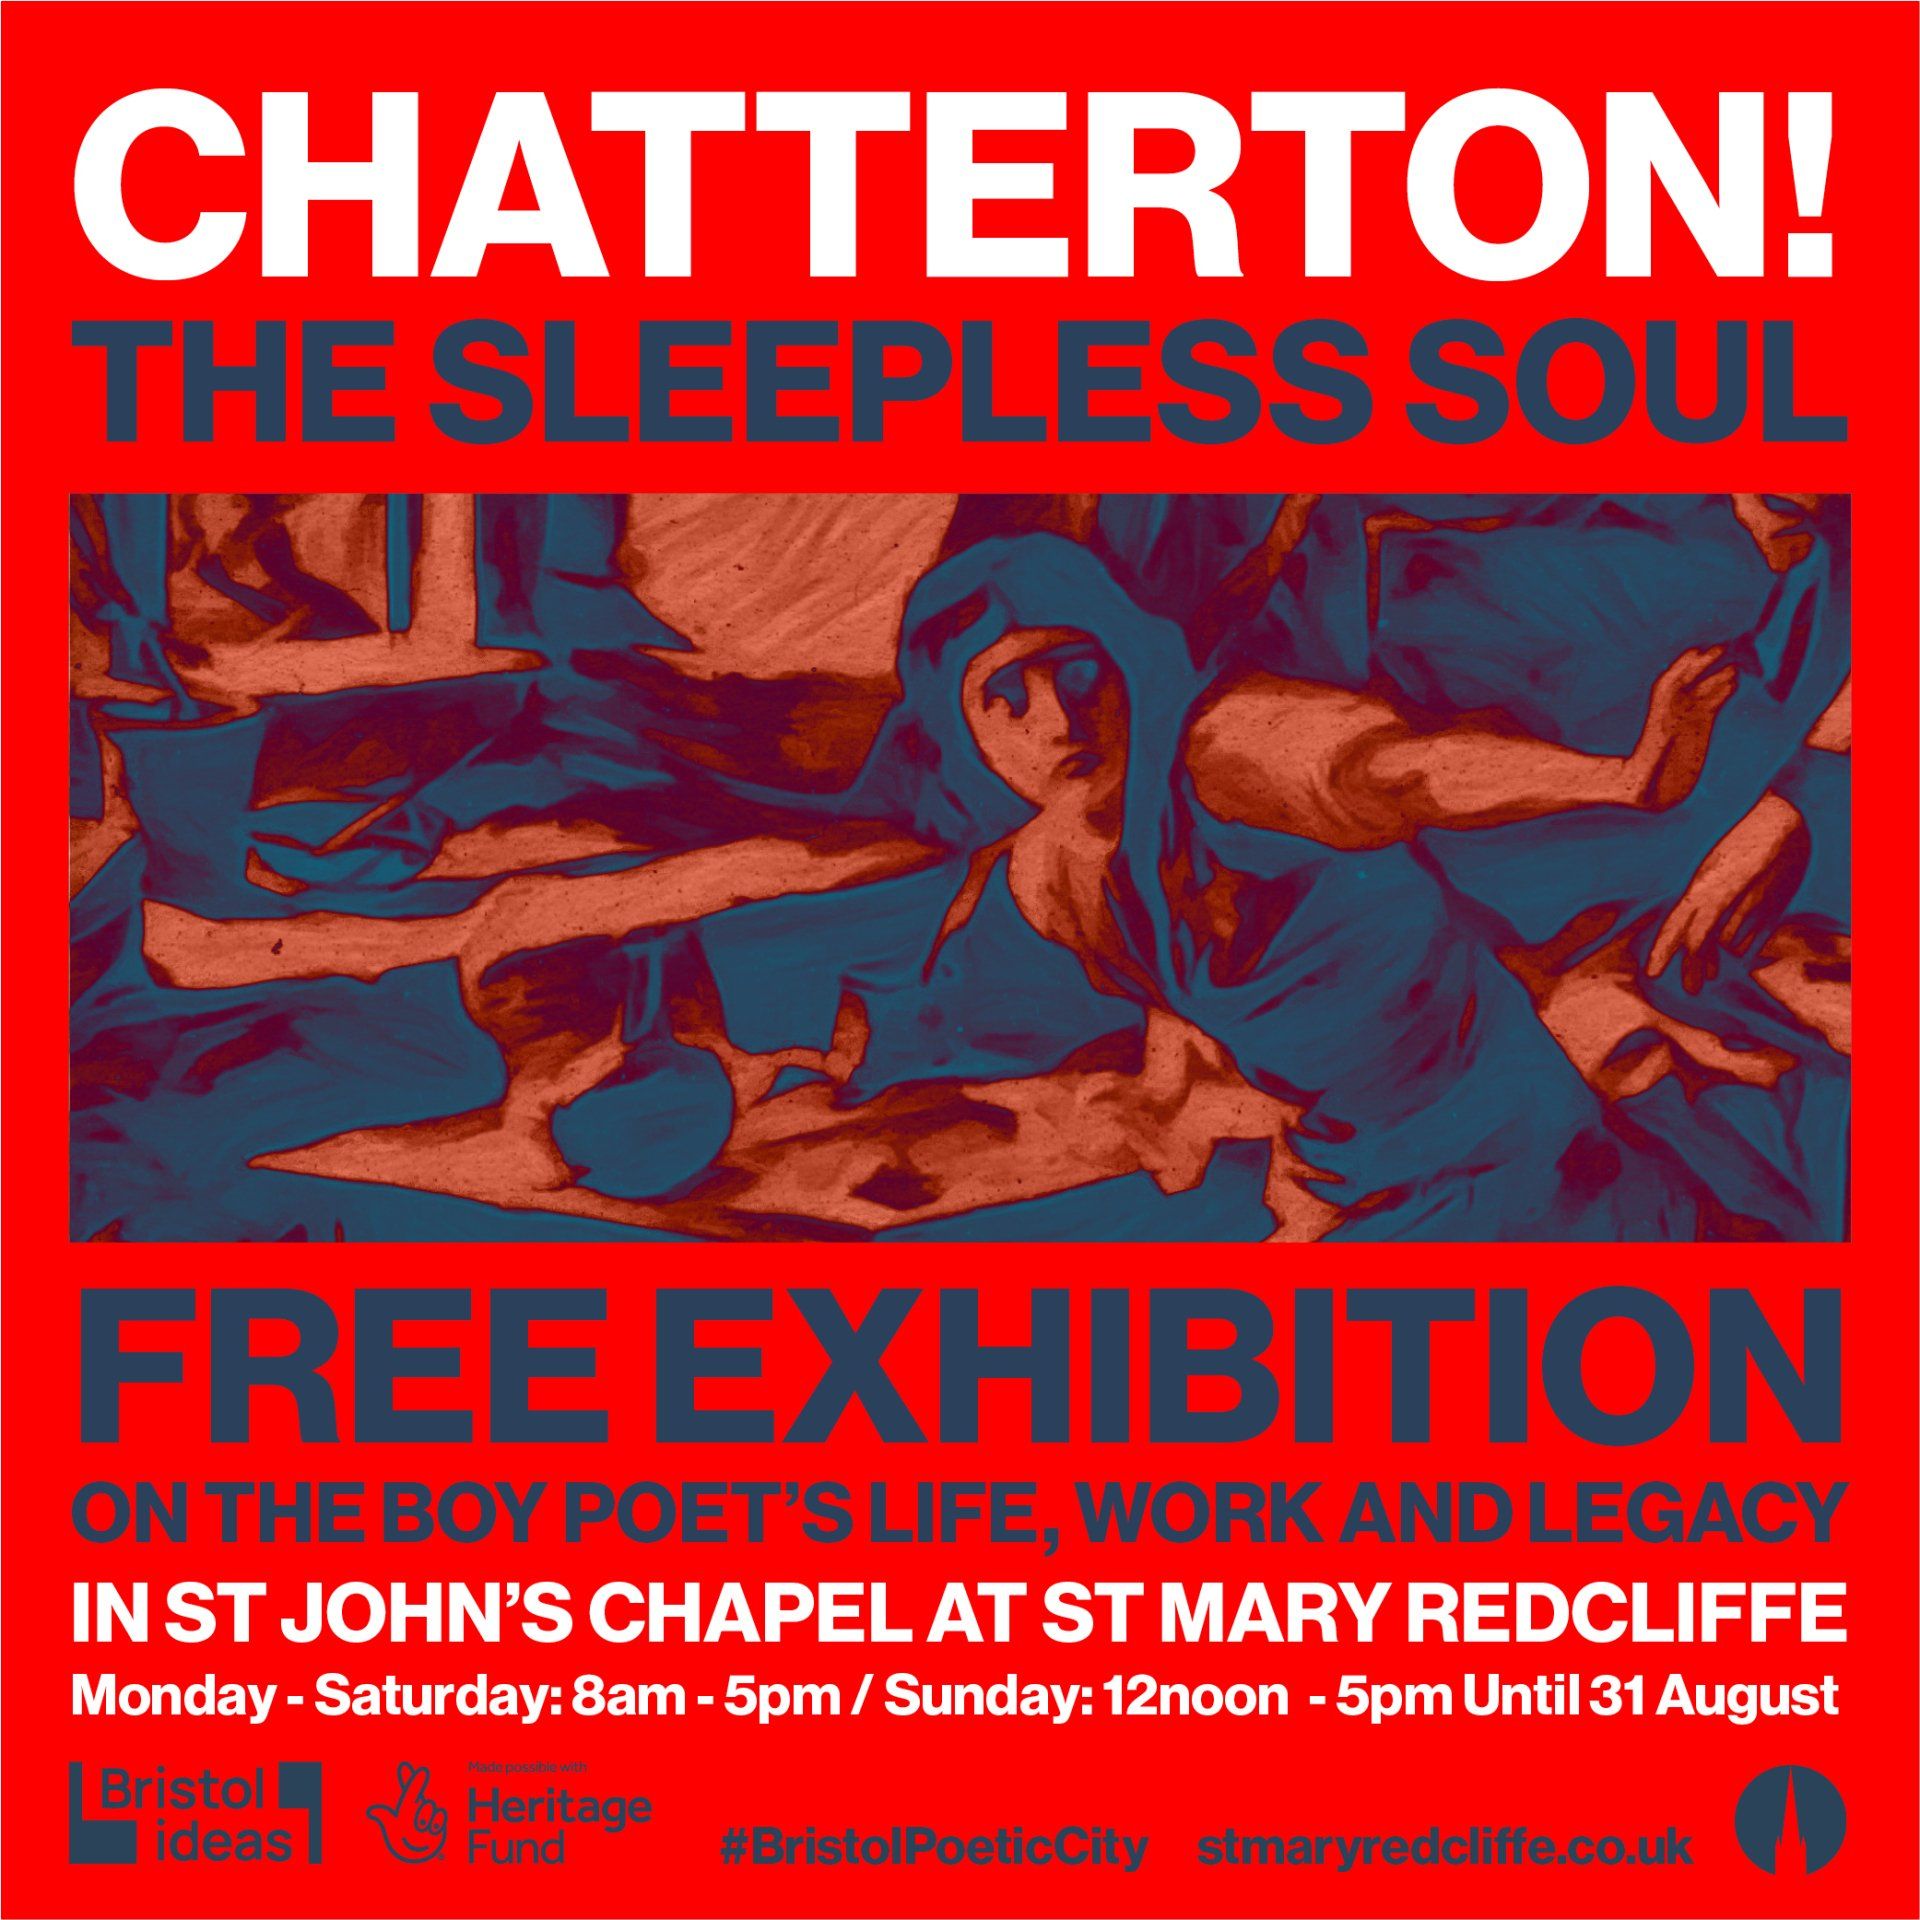 Image advertising an exhibition relating to the poet Chatterton